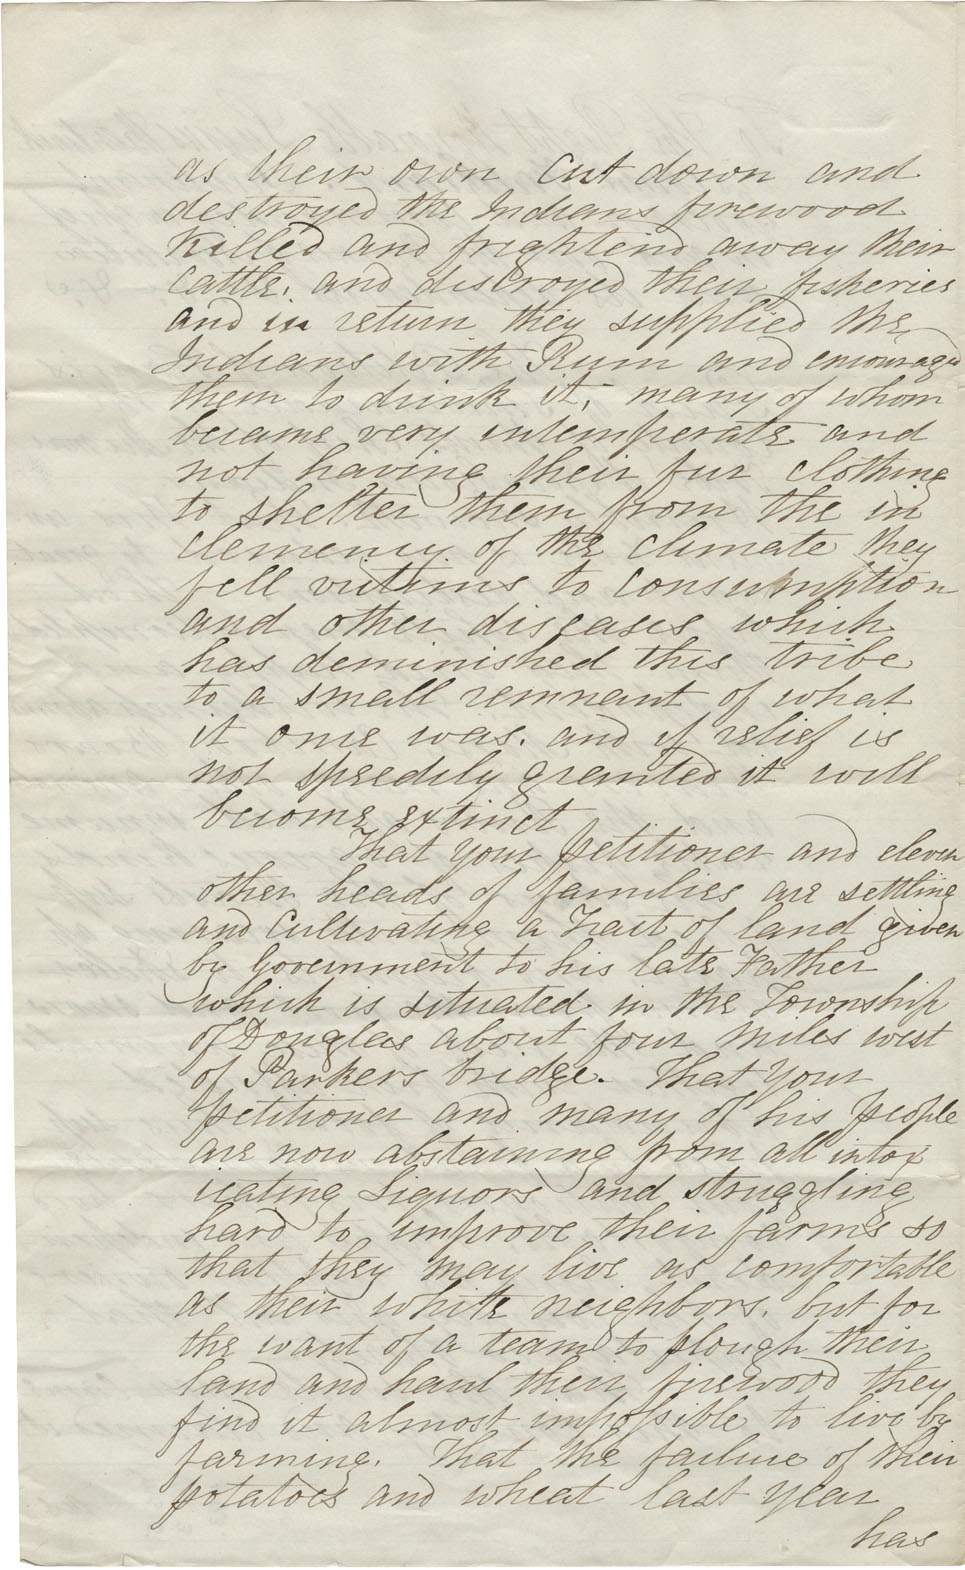 Petition of Francis Paul, Mi'kmaq Chief of Shubenacadie, for more assistance. 